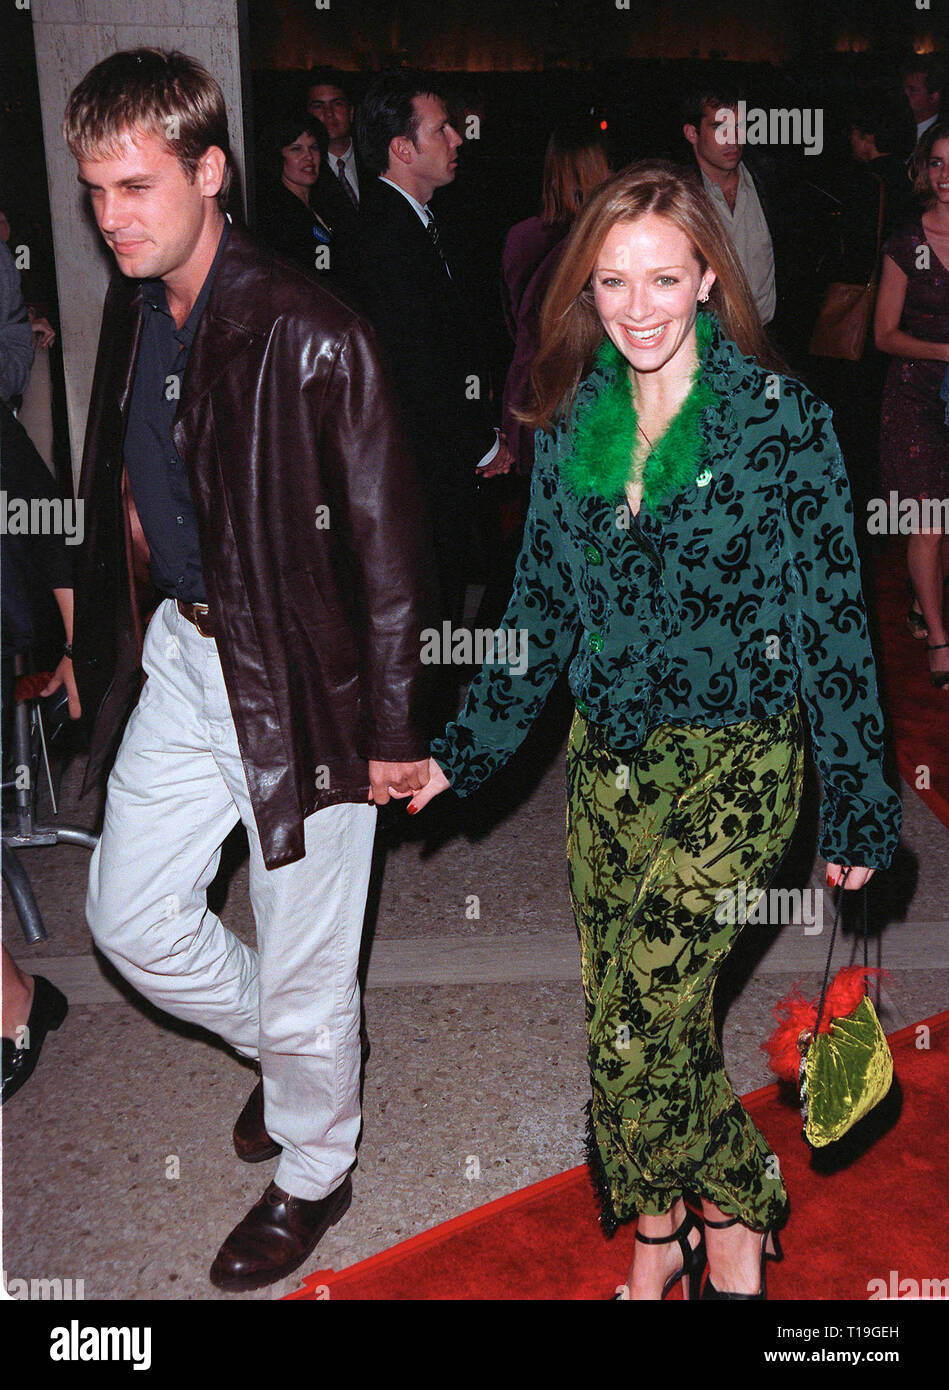 LOS ANGELES, CA - October 13, 1998:  Actress LAUREN HOLLY & date at the Los Angeles premiere of  'Practical Magic' which stars Sandra Bullock, Nicole Kidman, Aidan Quinn & Stockard Channing. Stock Photo